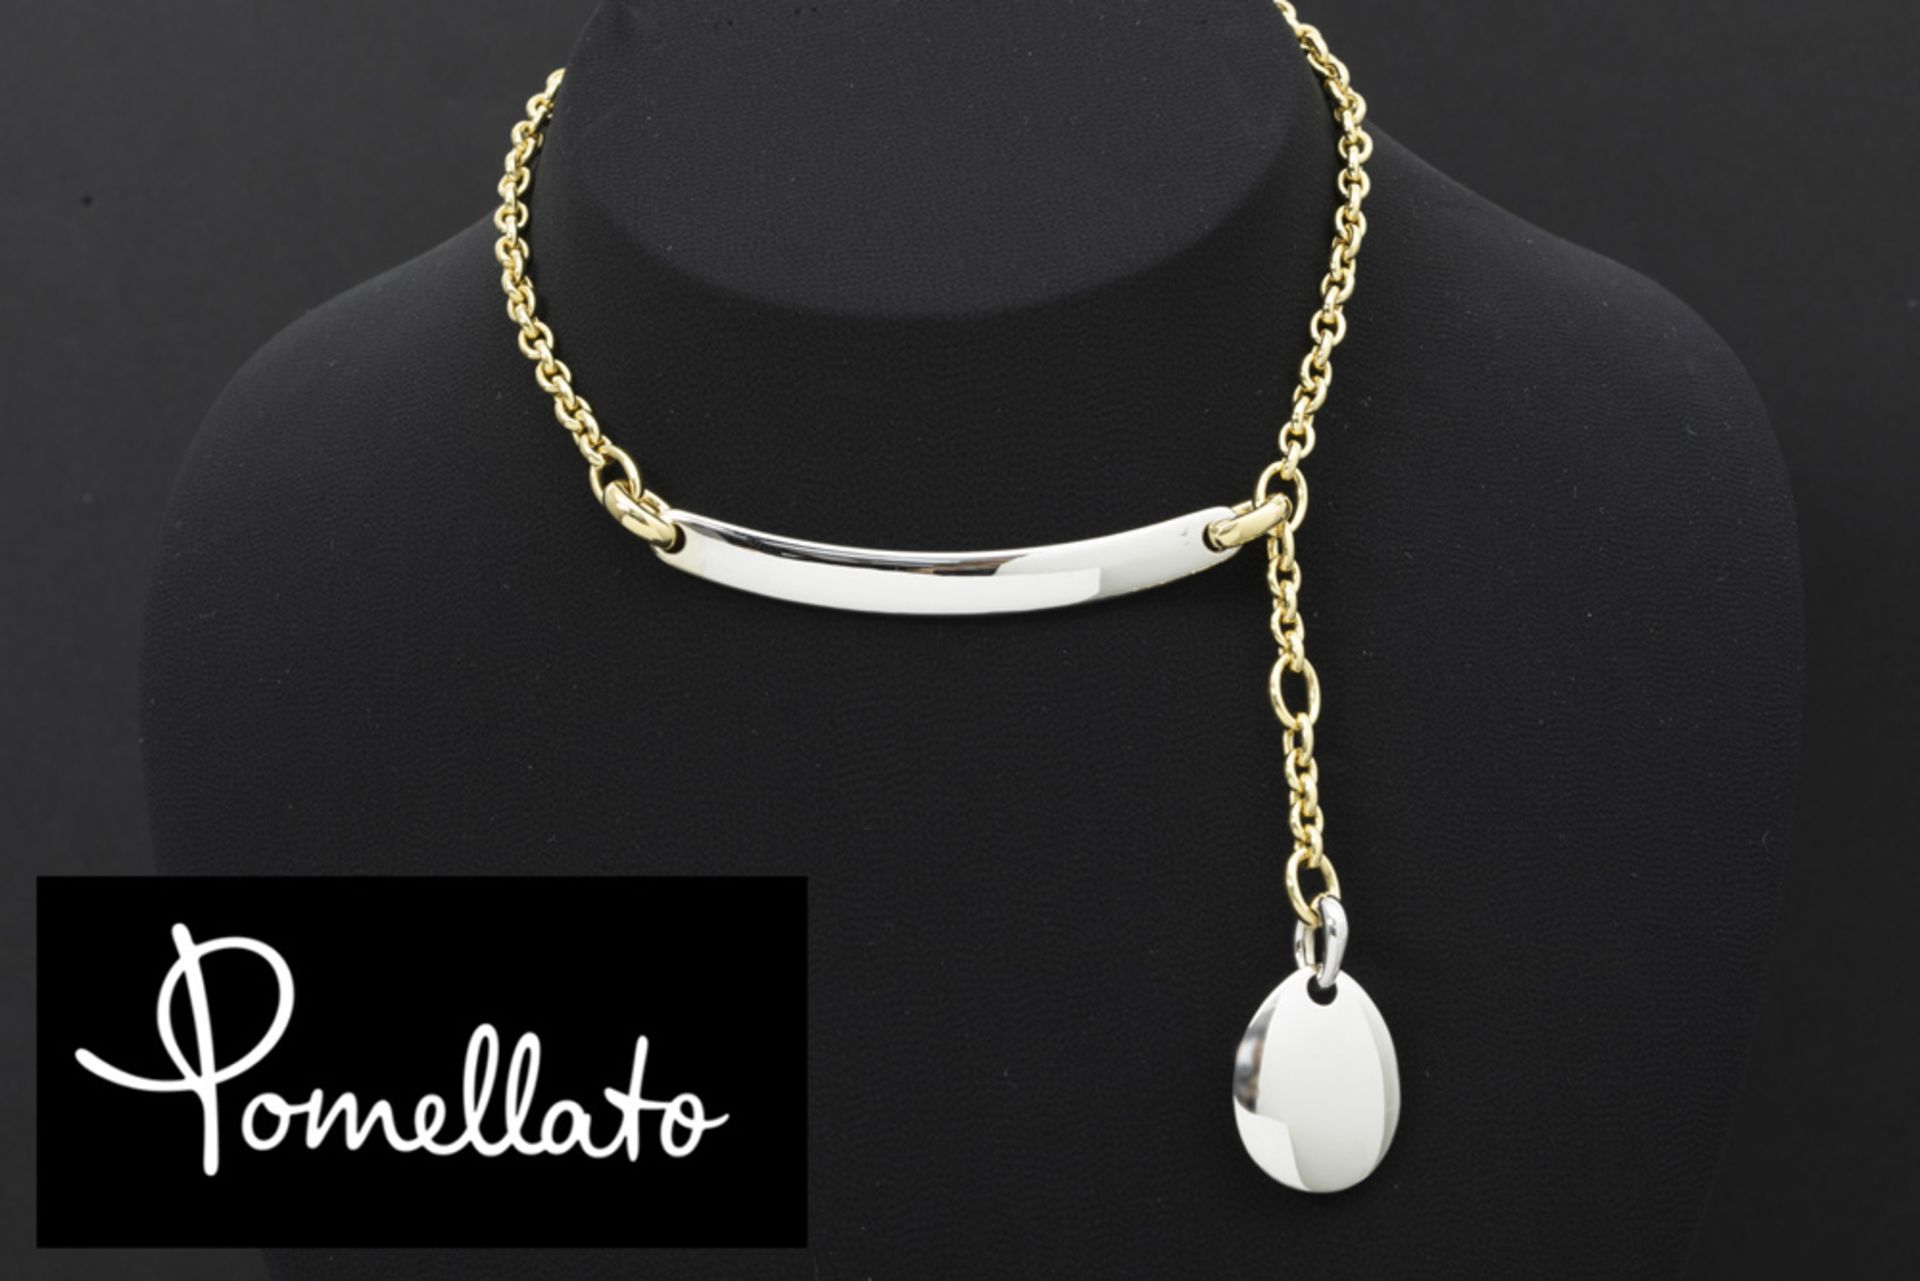 Pomellato signed necklace in yellow and white gold (18 carat) - with its origial round box || - Bild 2 aus 3